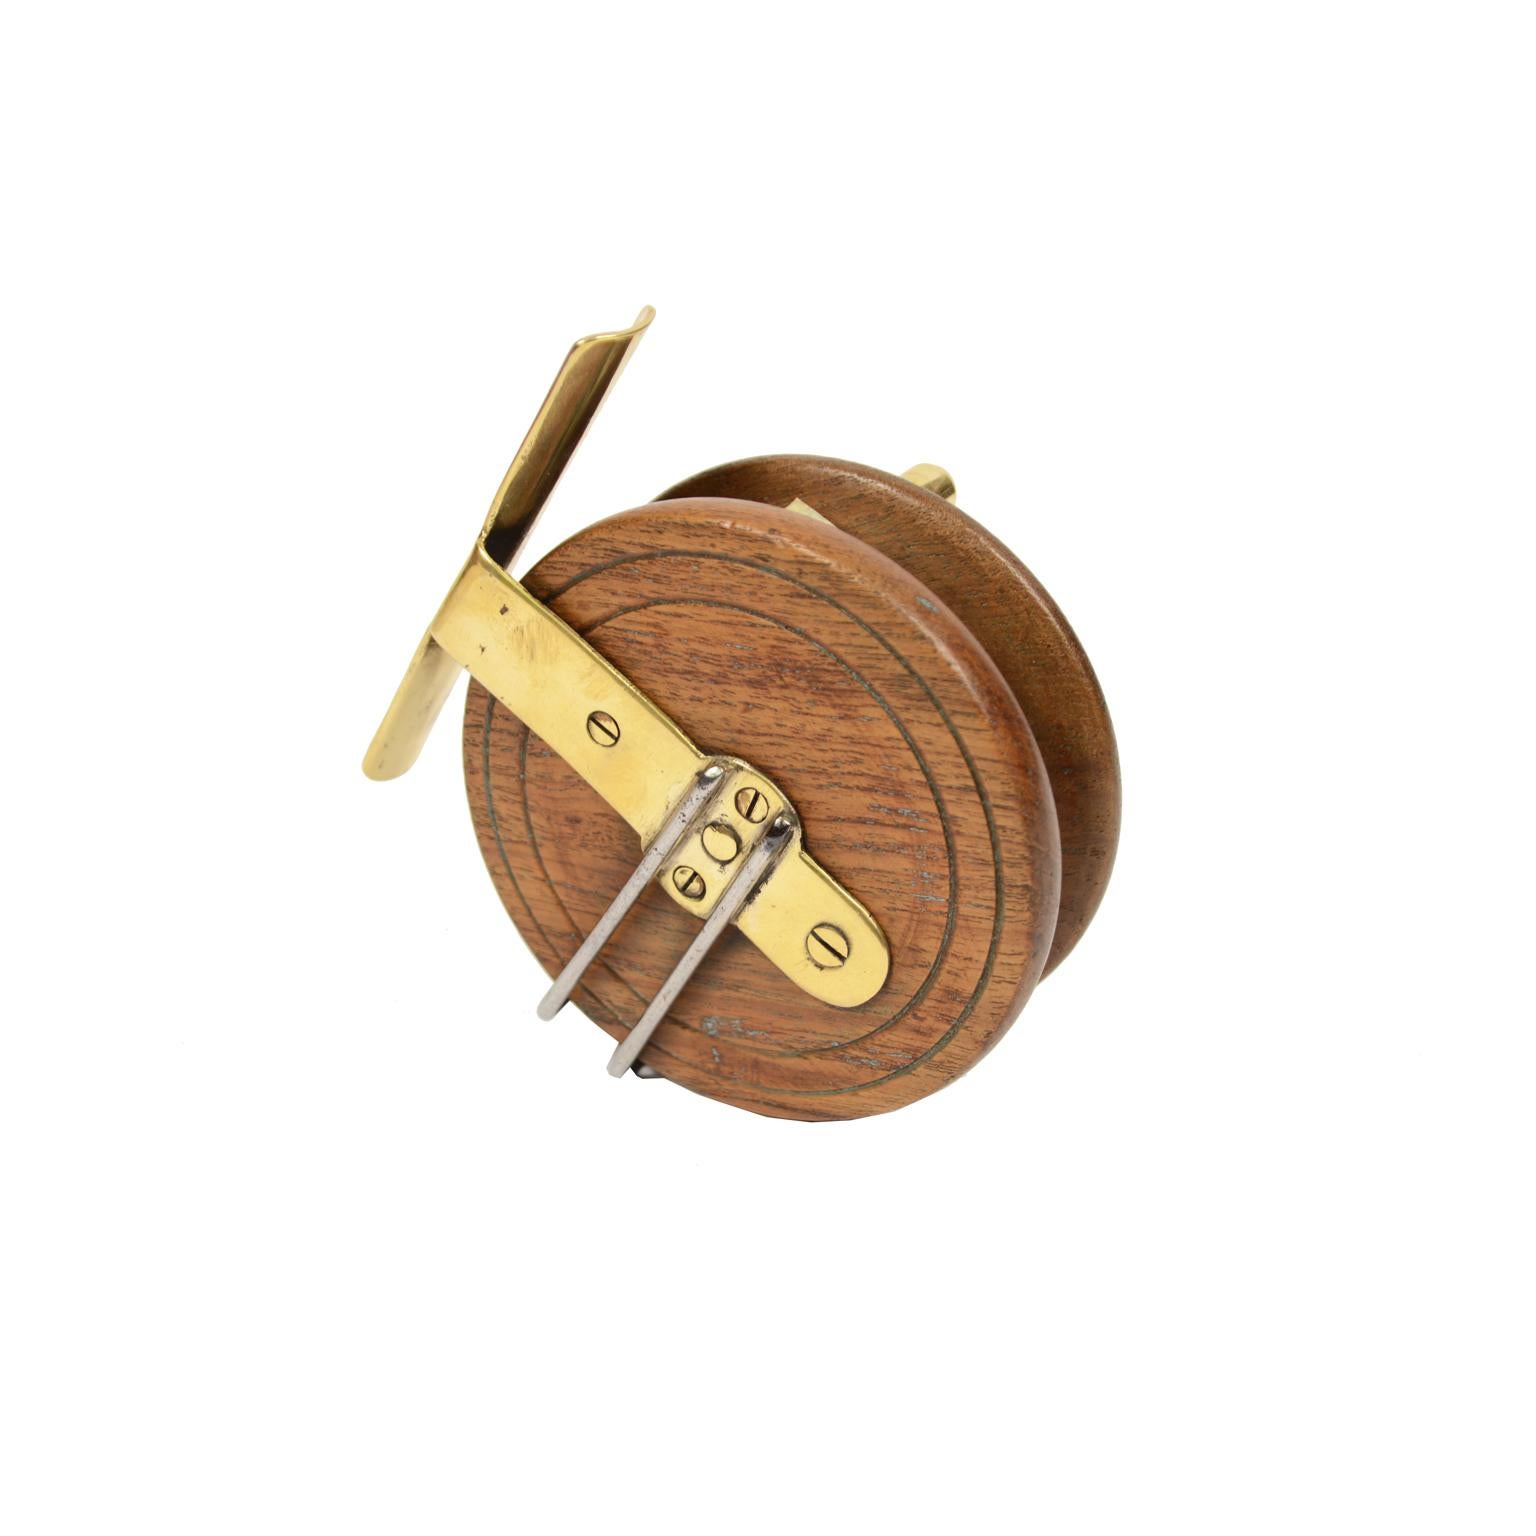 20th Century Fishing Reel Made of Turned Oak and Brass, UK, Early 1900s